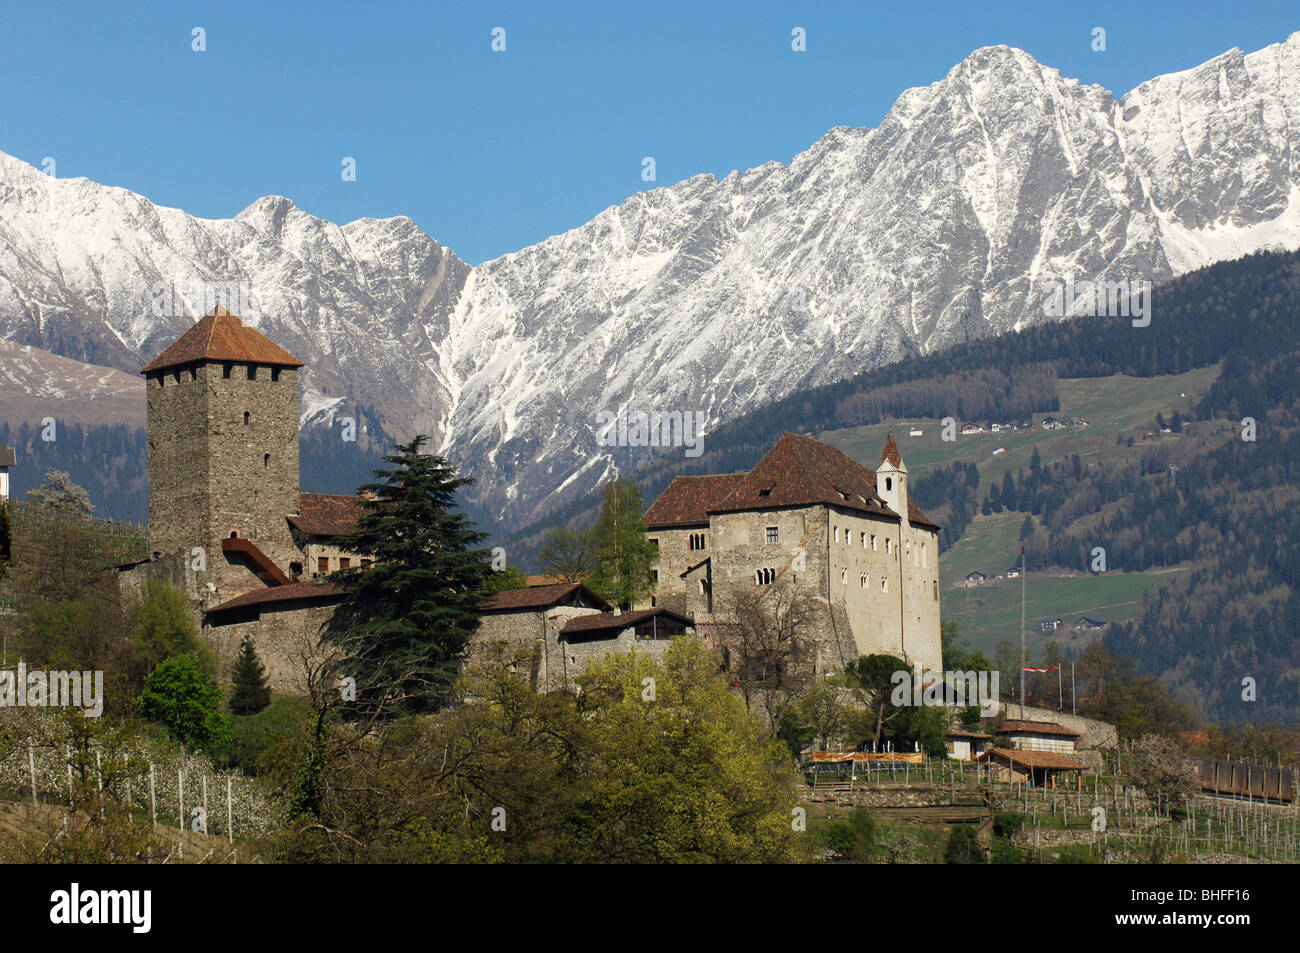 Tyrol castle in spring in front of snow covered mountains, Burggrafenamt, Etsch valley, South Tyrol, Italy, Europe Stock Photo